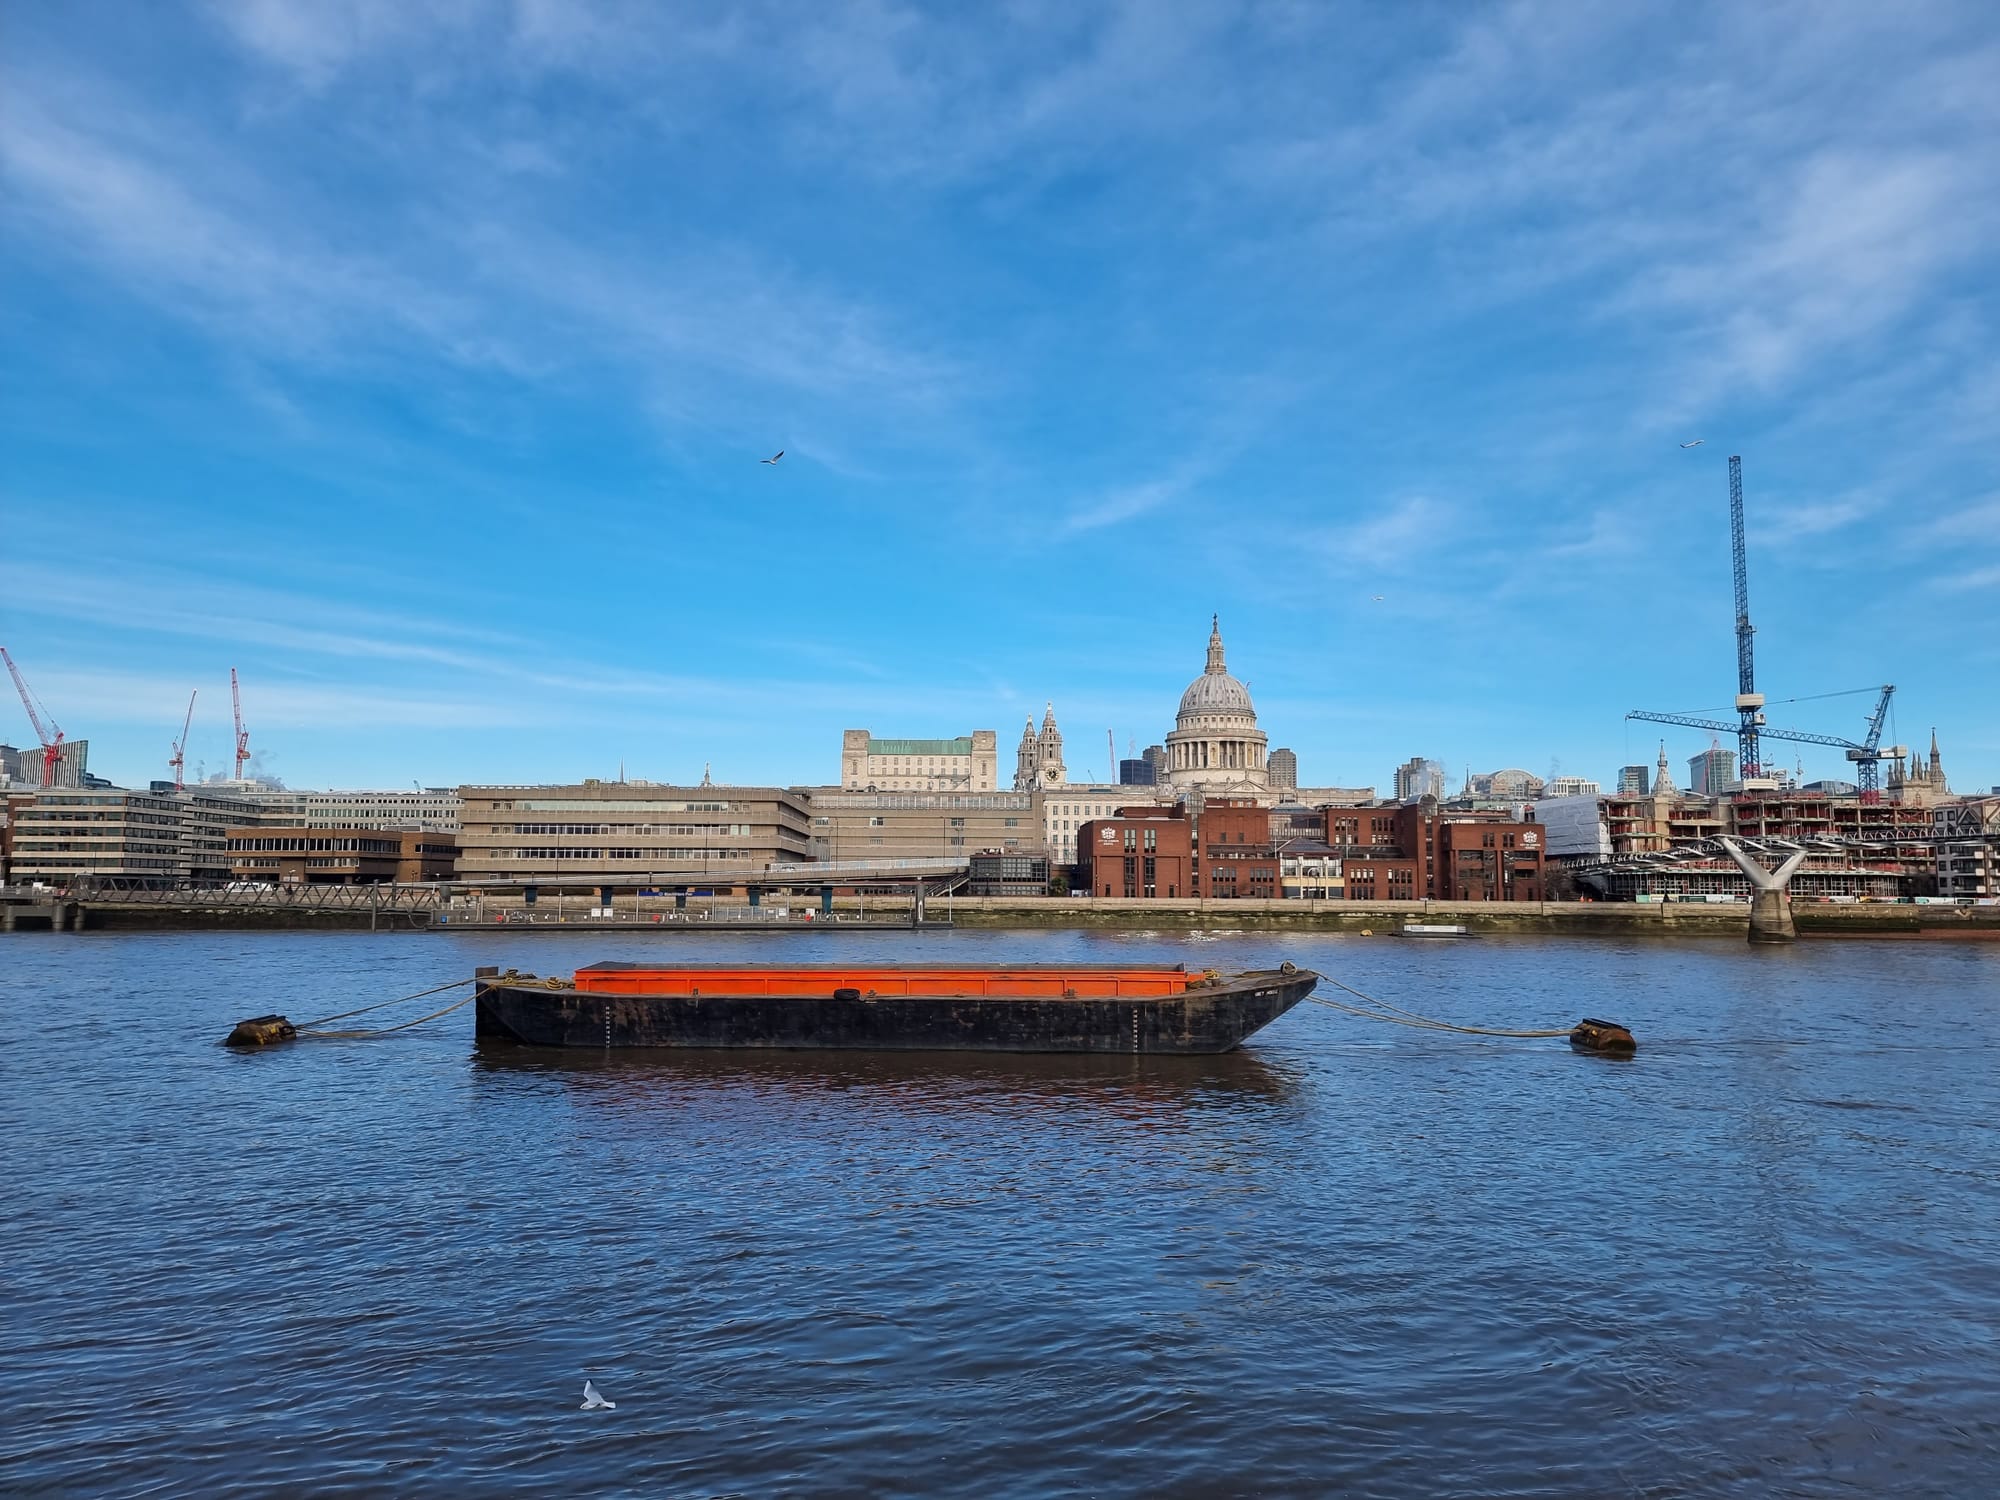 View across the Thames towards St. Paul's Cathedral, with a boat in the centre.